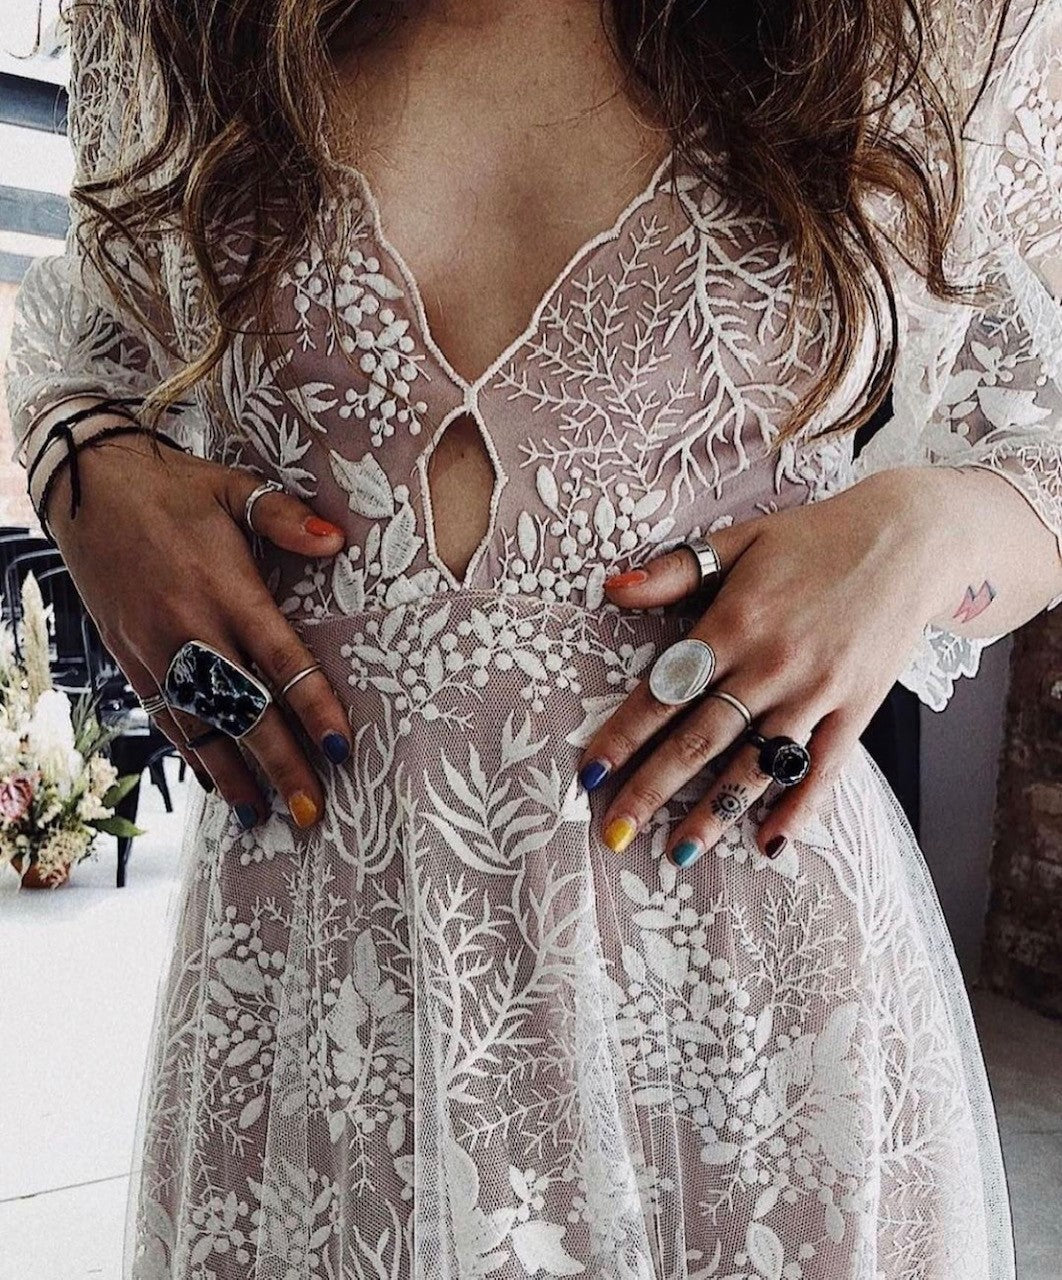 Shop Lace Outfits, Pretty, Elegant Lace Outfit Styles